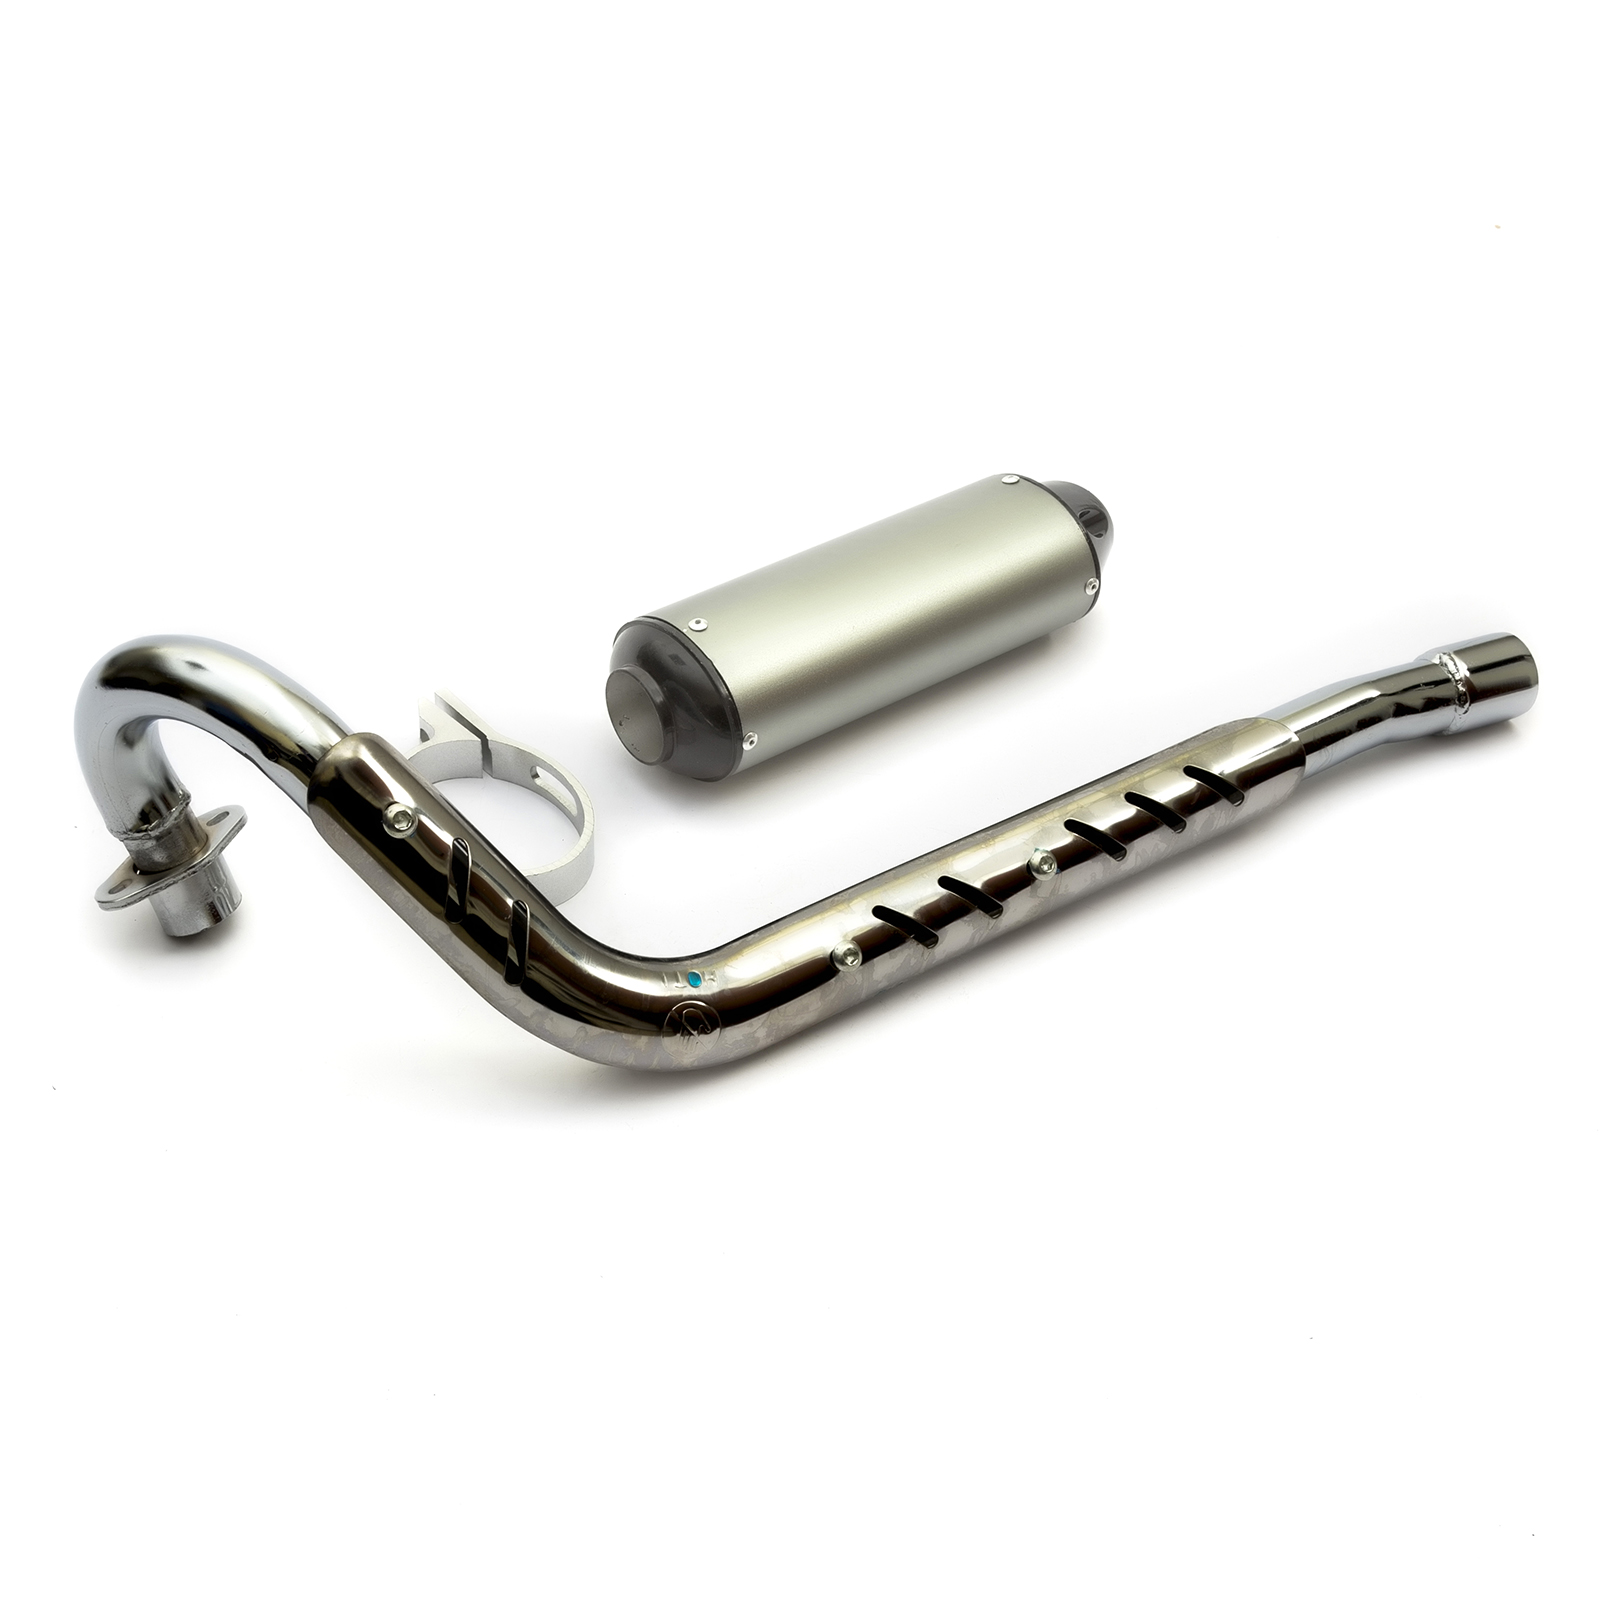 Pitbike Chrome Big Bore Exhaust System Complete For 110cc 125cc 140cc